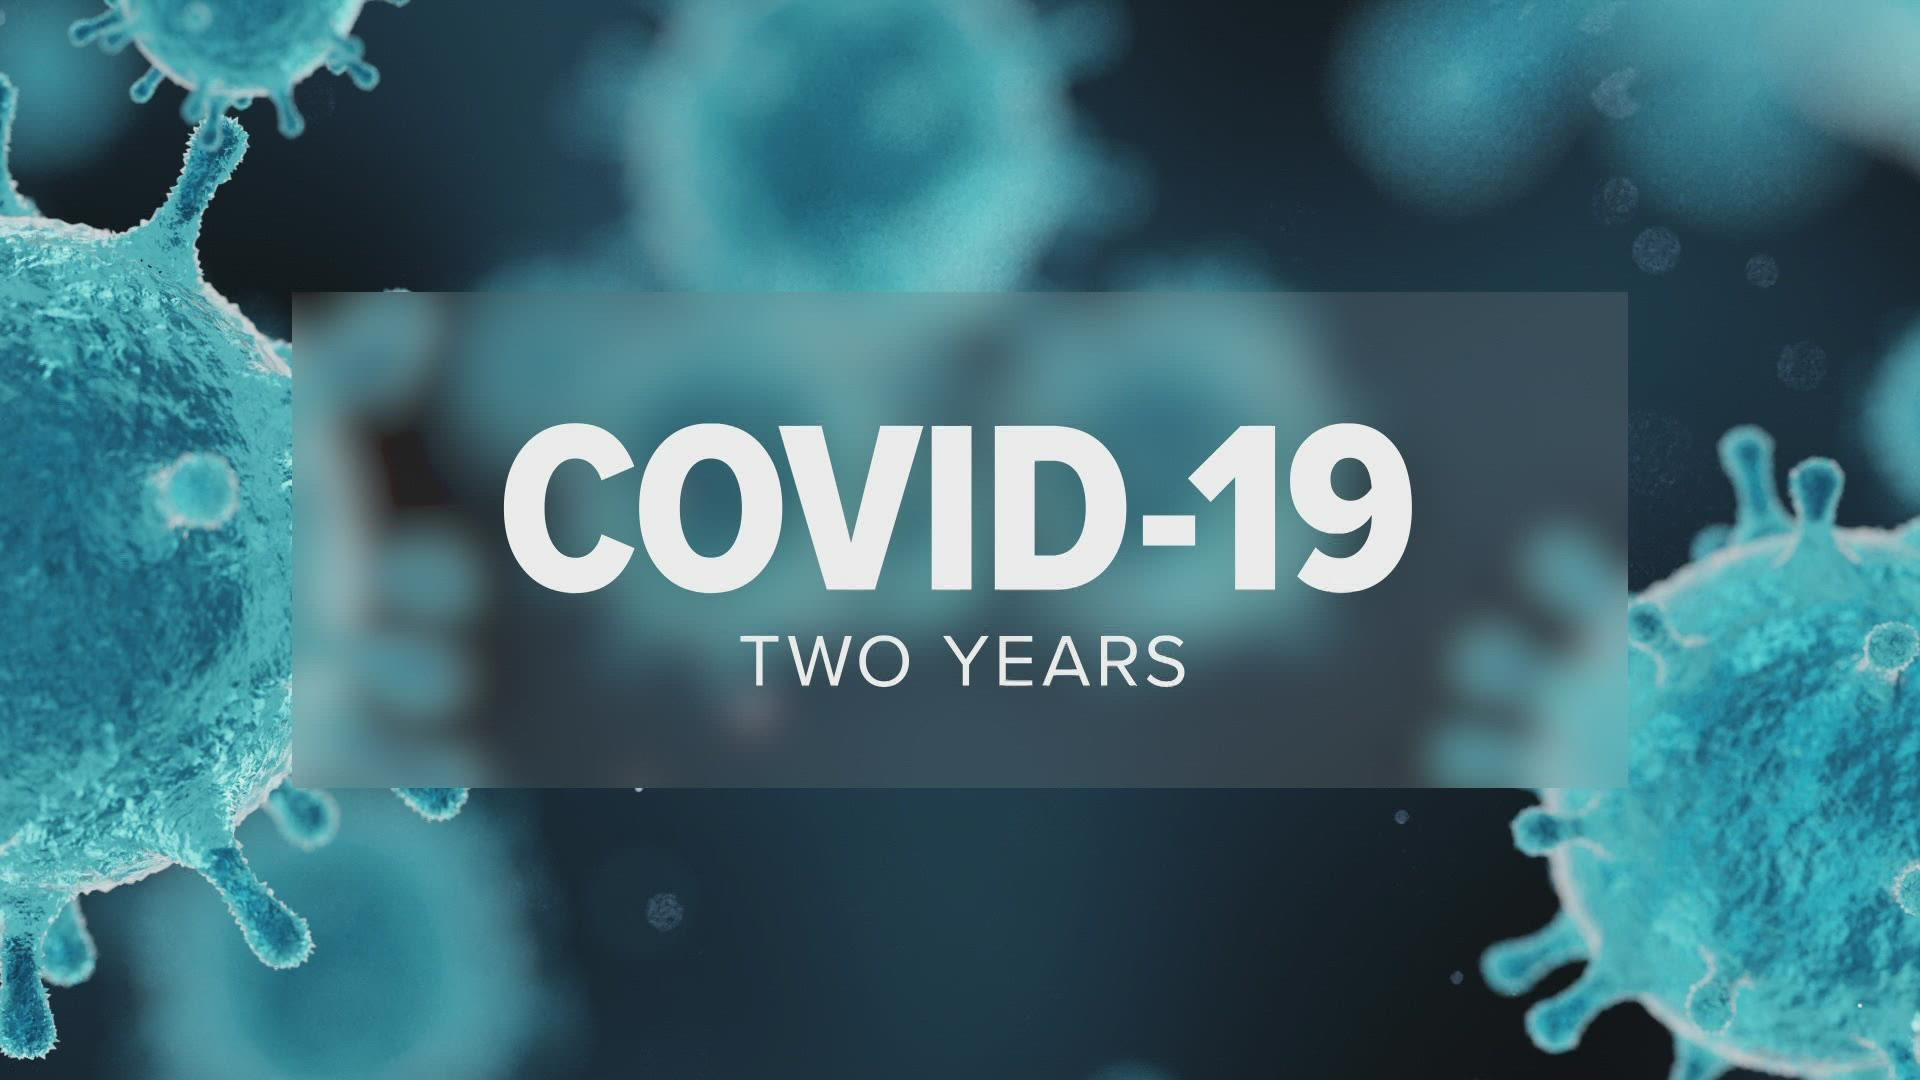 In February 2020, Washington state reported the first known COVID-19 death in the country